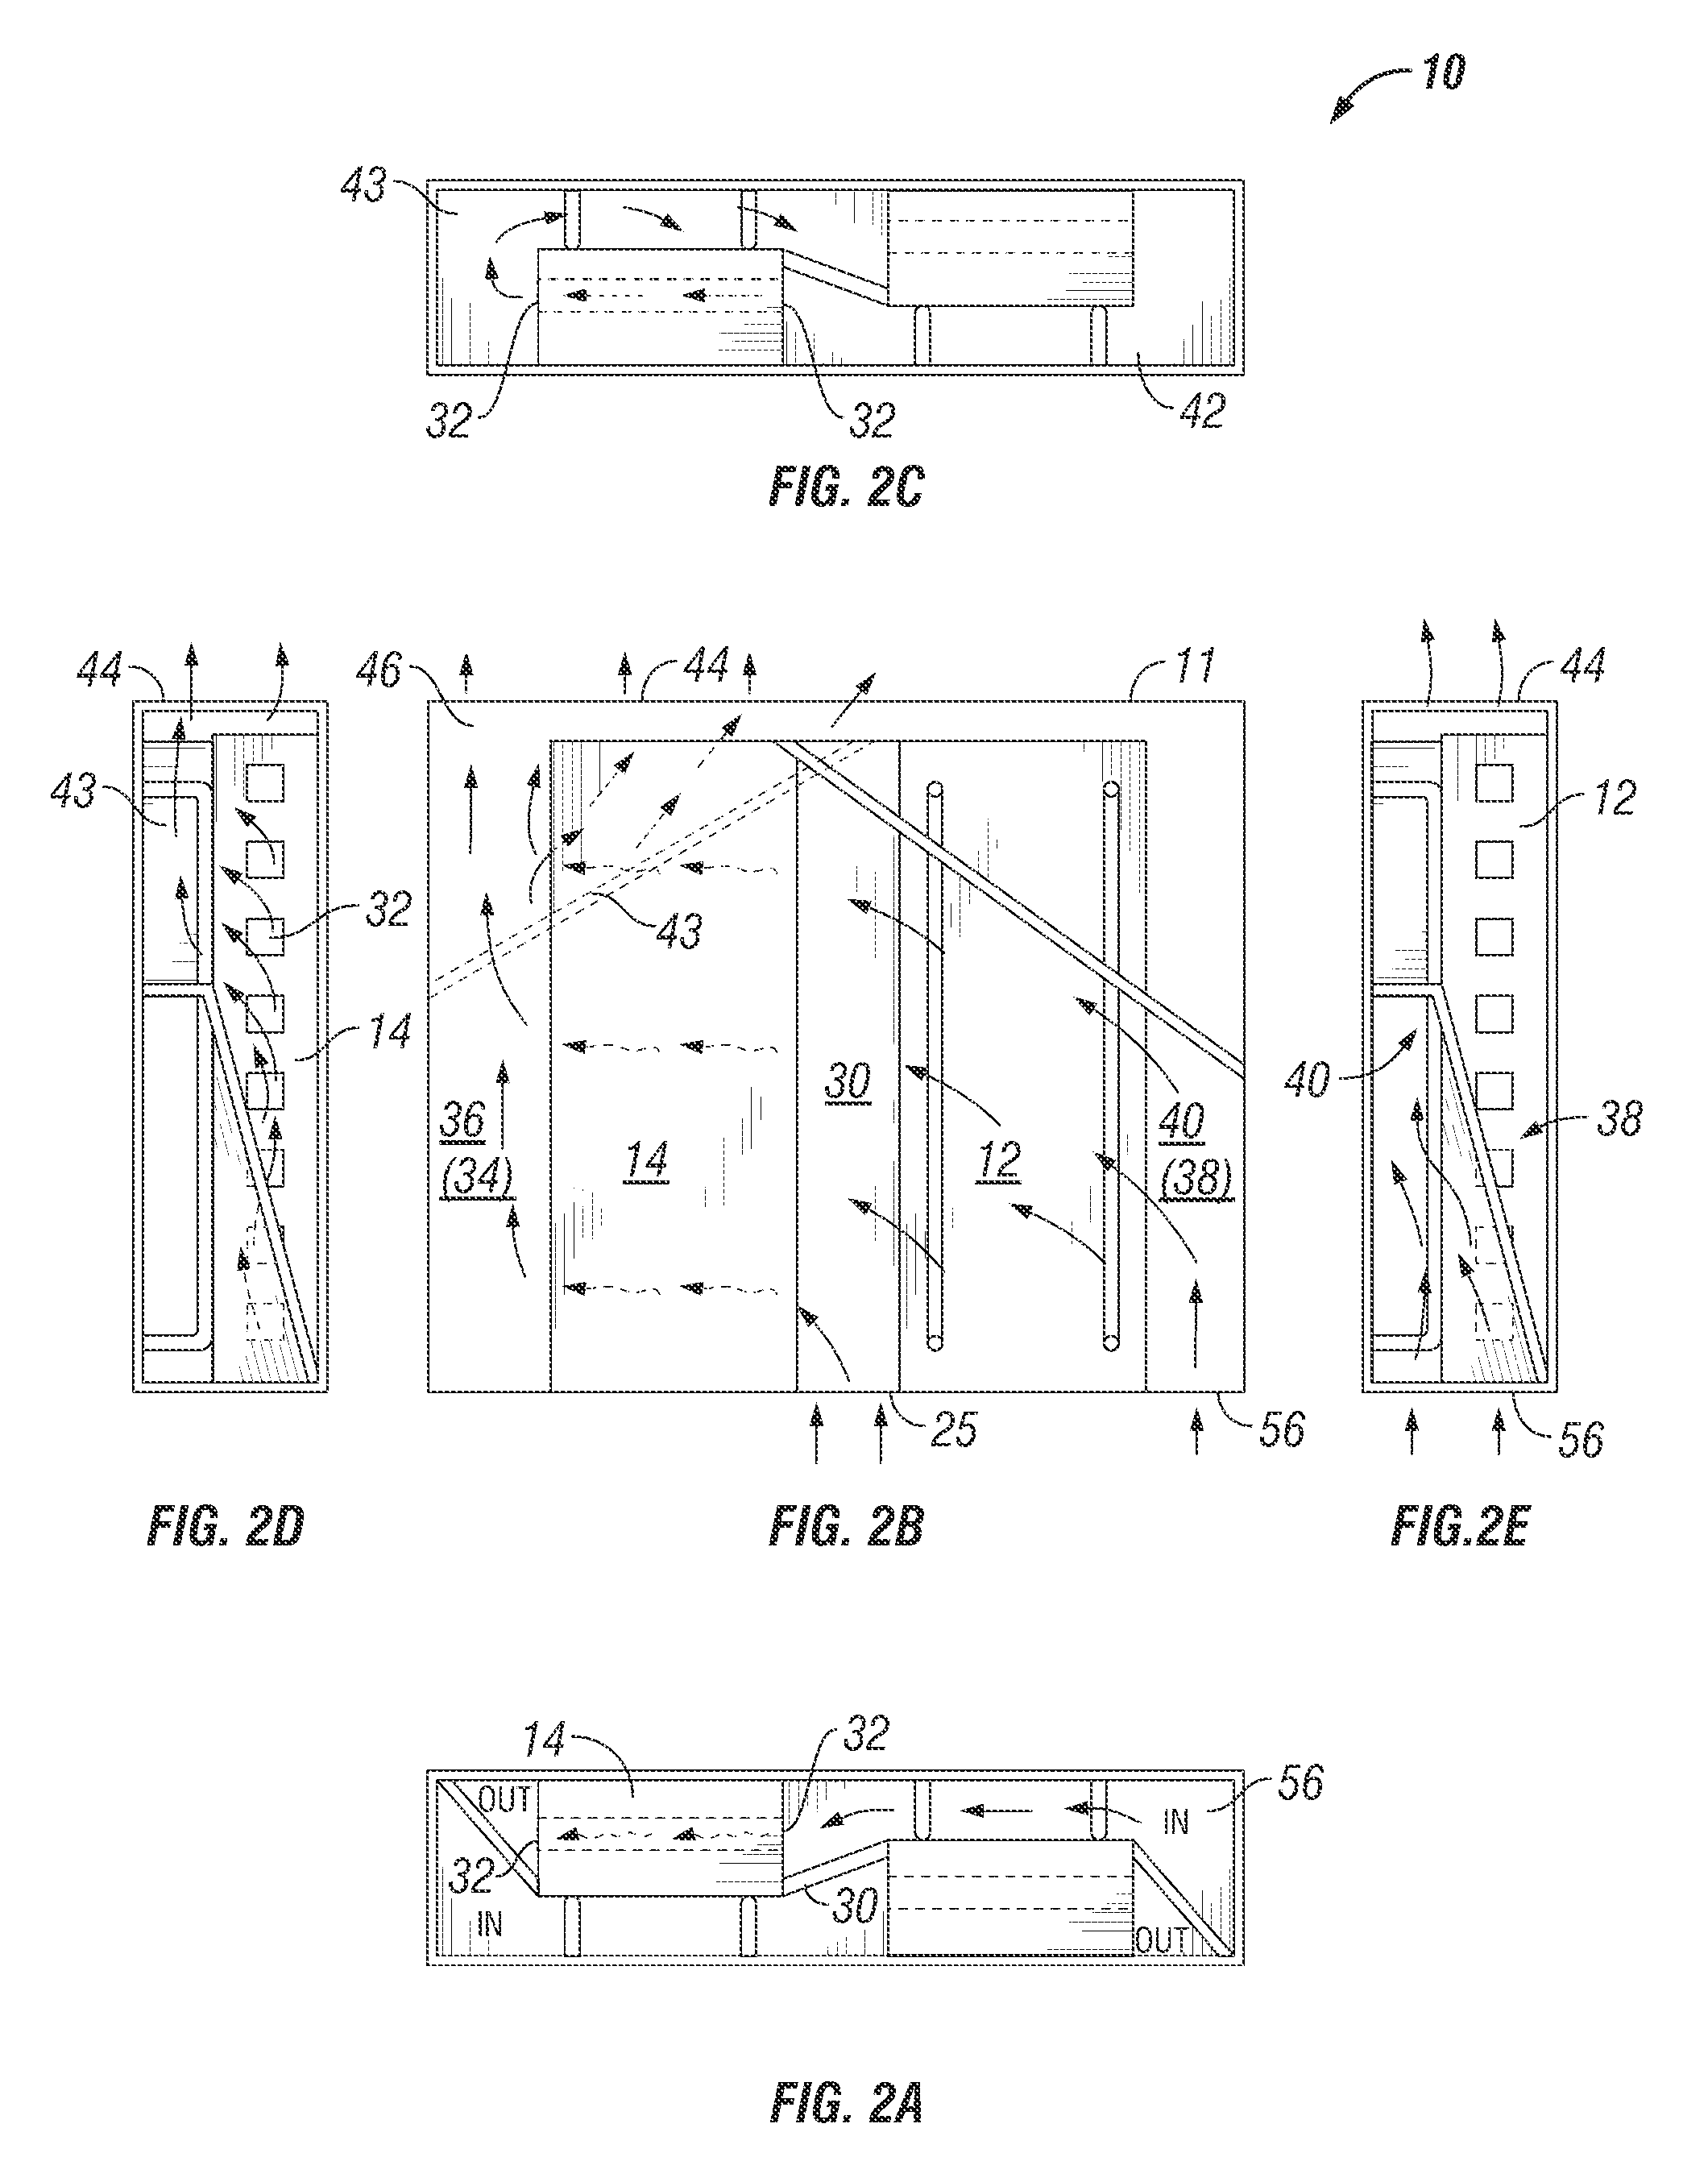 Mechanical assembly to support orthogonal airflow devices in a normal airflow slot of a server chassis